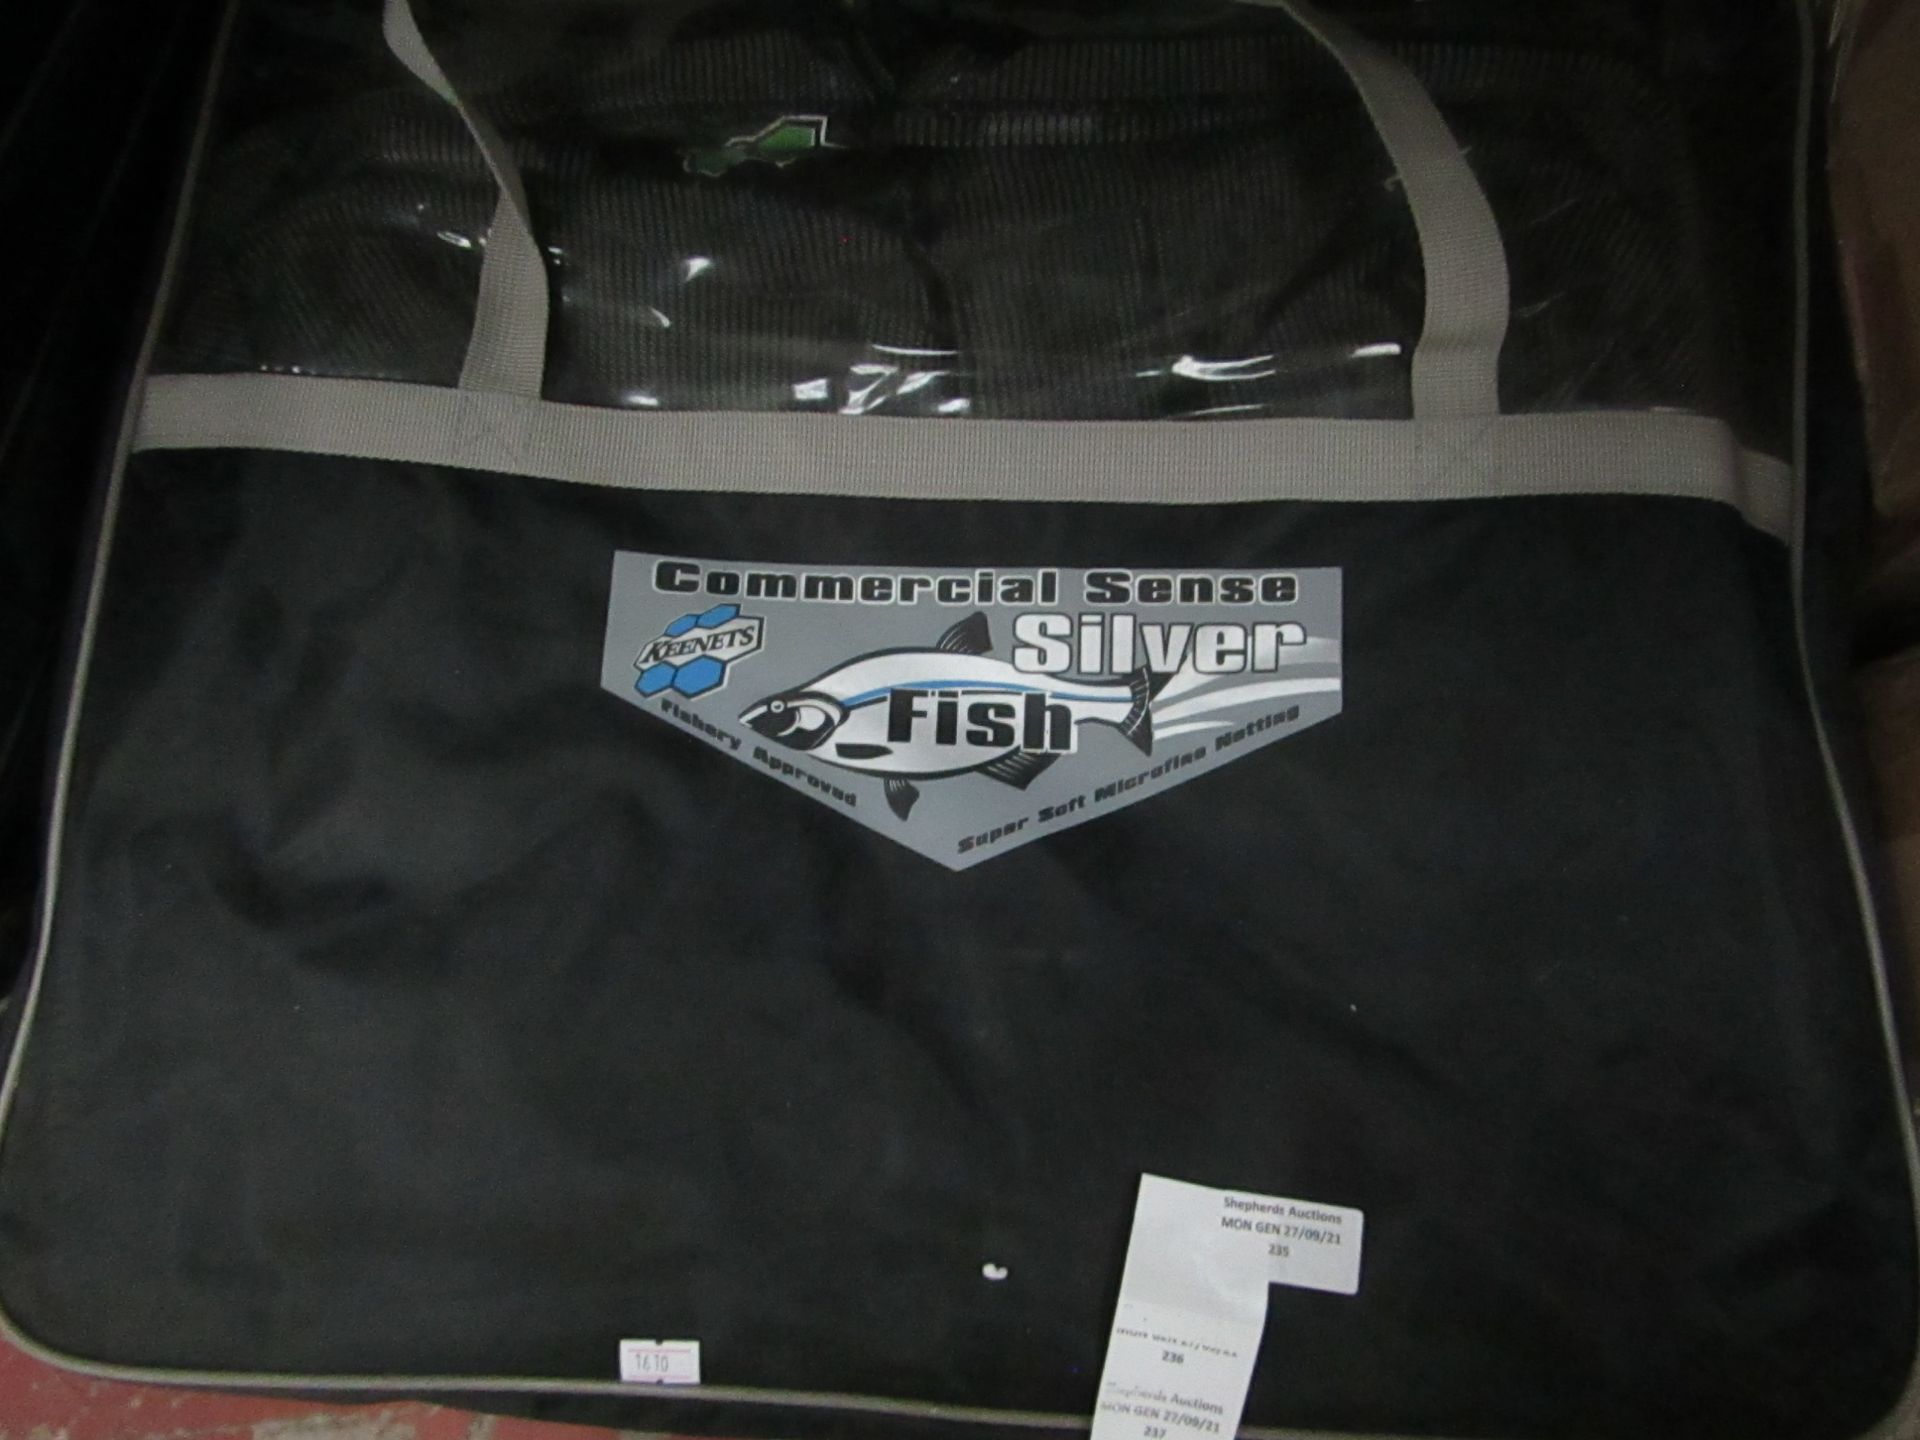 Keenets - Commercial Sense Silver Fish Micro-Fibre Netting - Unused, Comes With Portable Carry Bag.